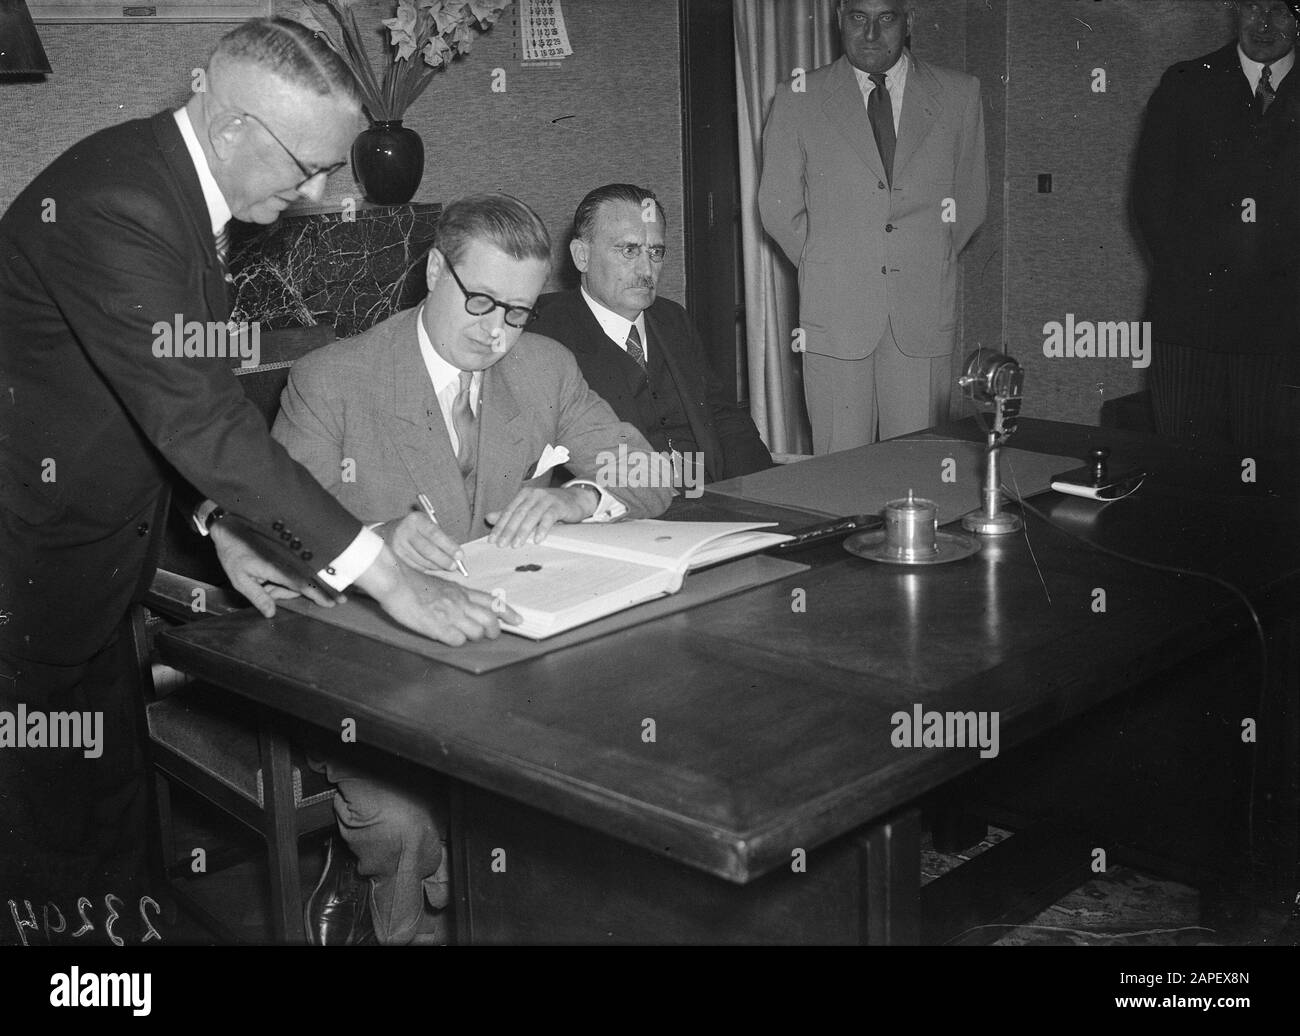 Belgian Minister L.E. Troclet signs the Mutual Insurance Agreement between Belgium and the Netherlands. To the right of him Minister of Social Affairs W. Drees Date: 29 August 1947 Keywords: international agreements, ministers Personal name: Drees, Willem (sr.), Troclet, L.E. Stock Photo